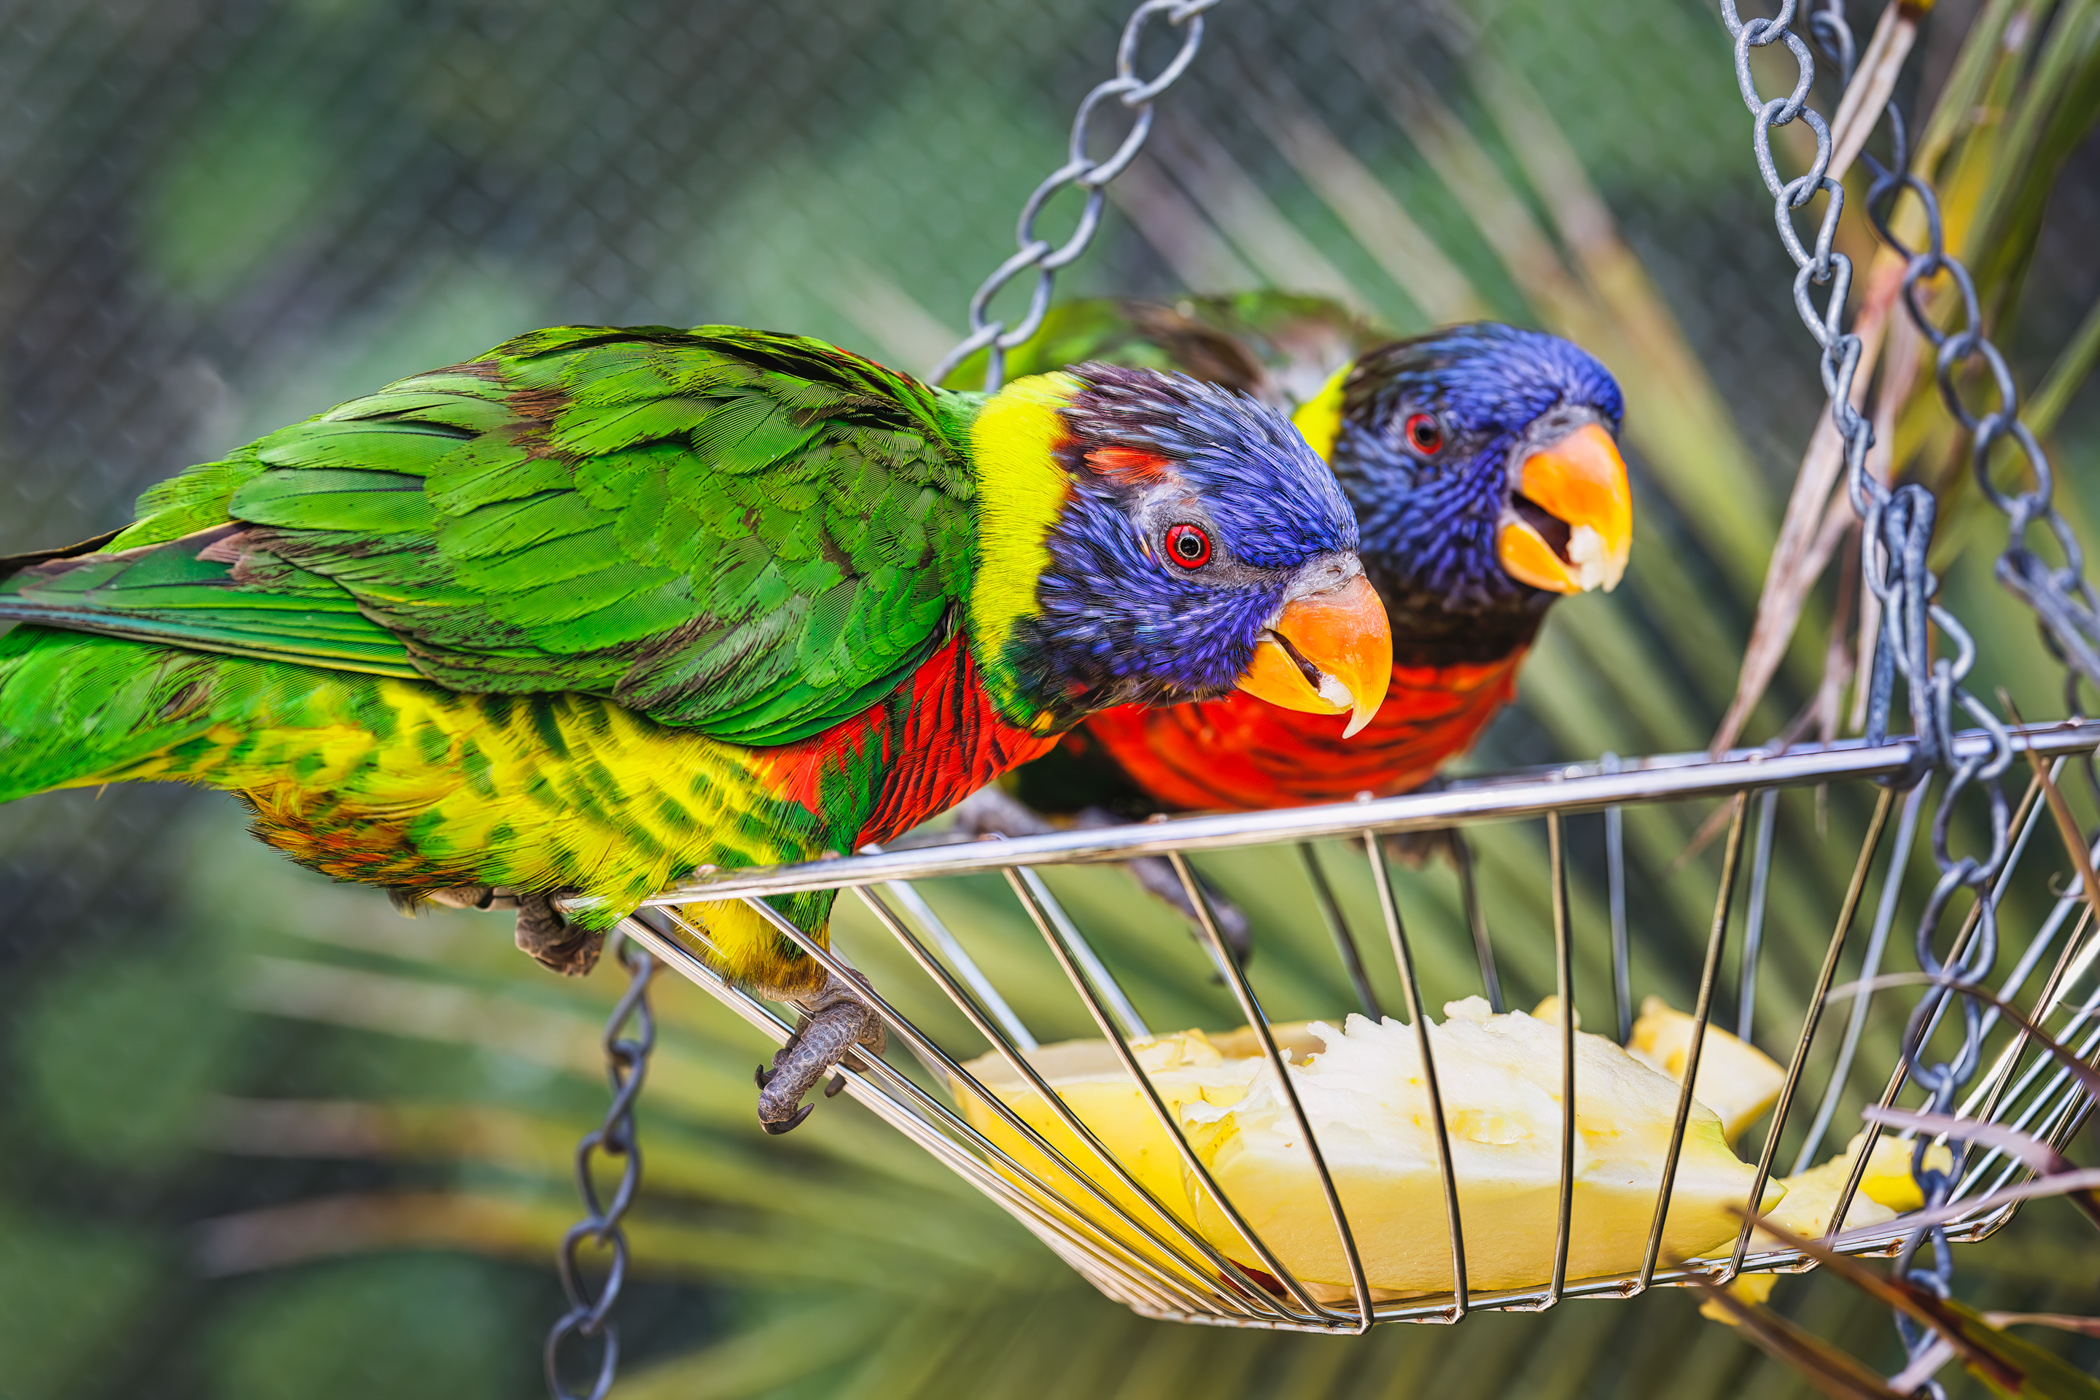 Two lorikeets eating from fruit basket.